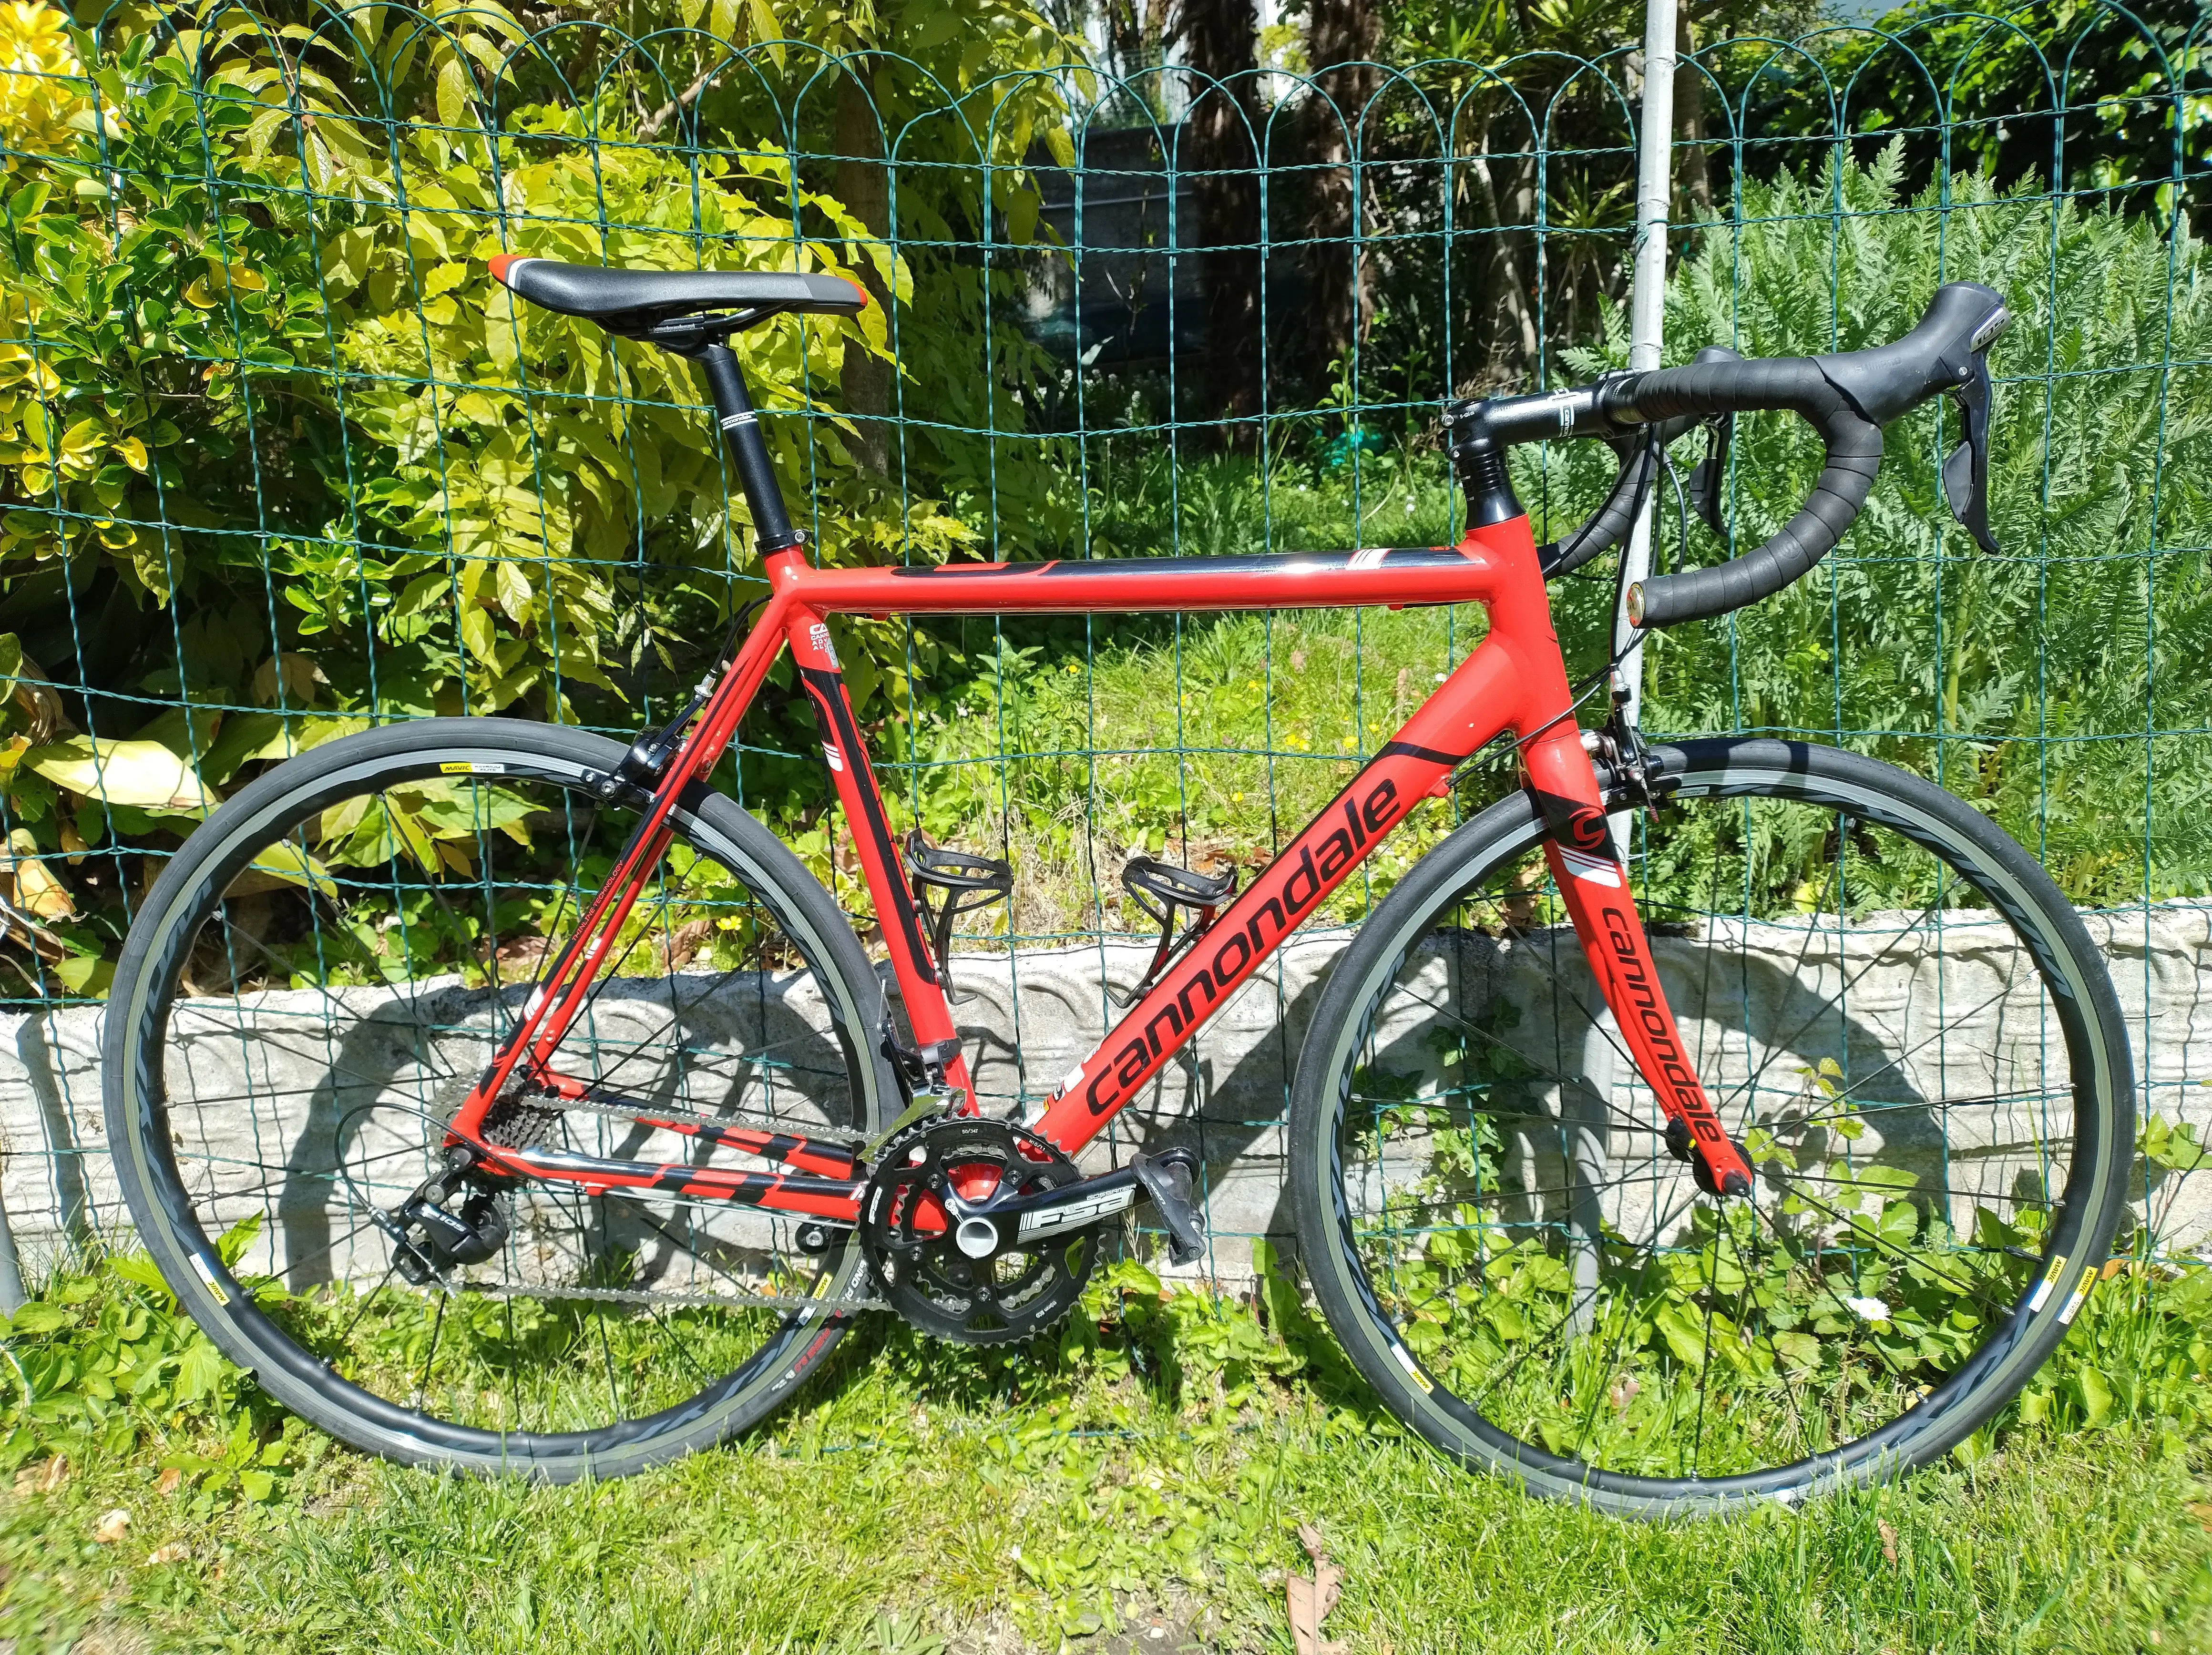 Cannondale CAAD8 105 used in 56 cm | buycycle